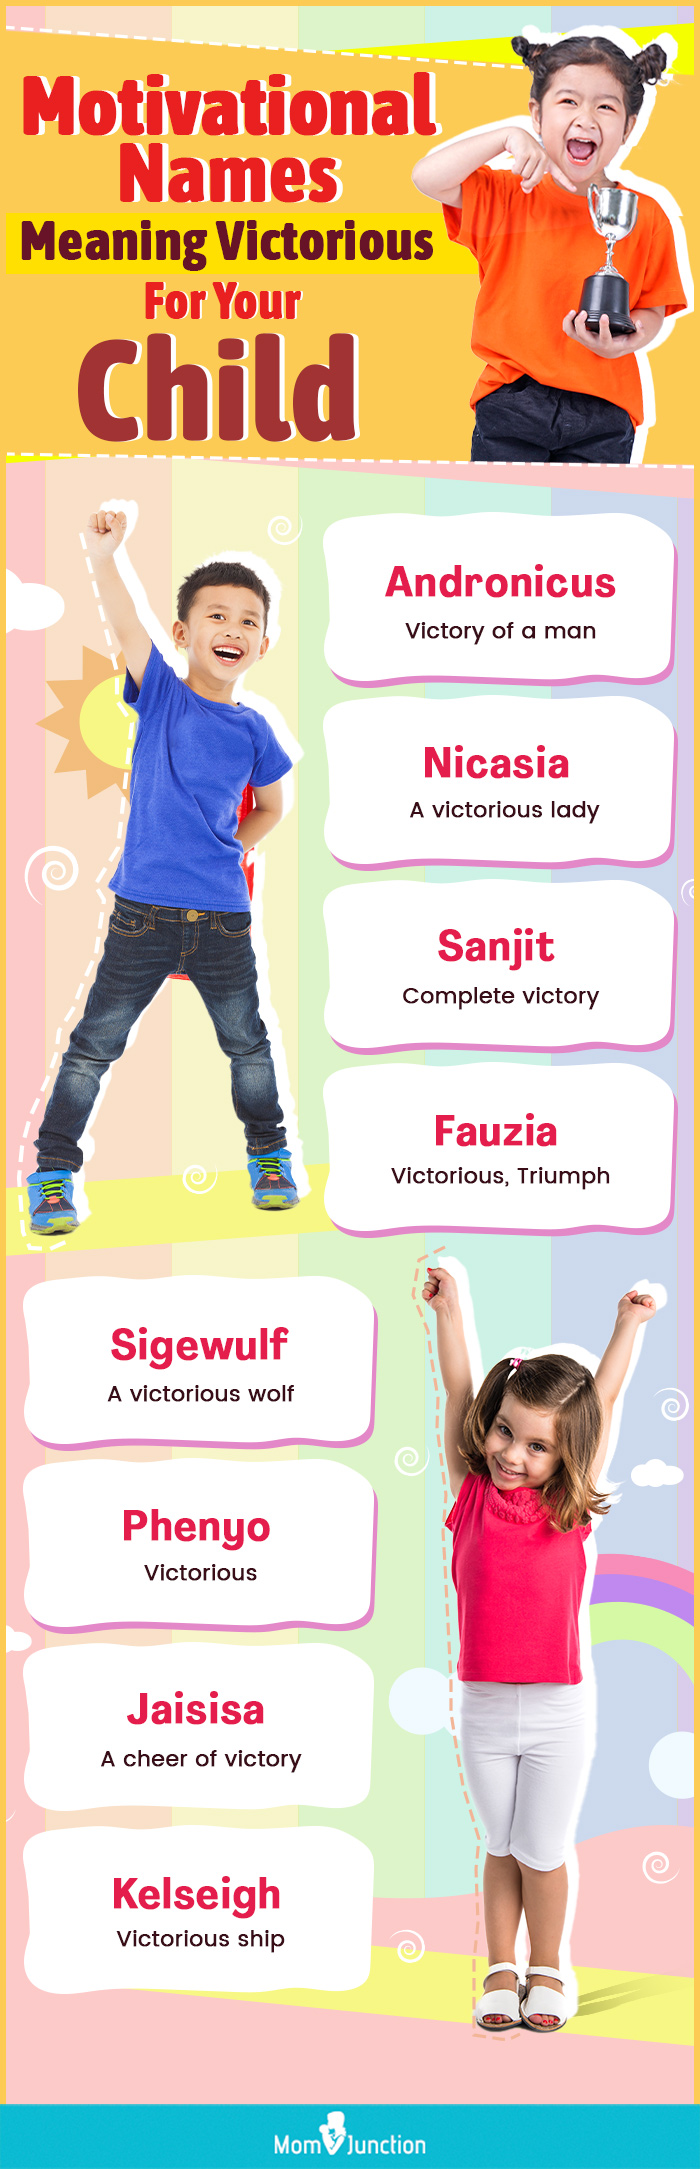 motivational names meaning victorious for your child (infographic)